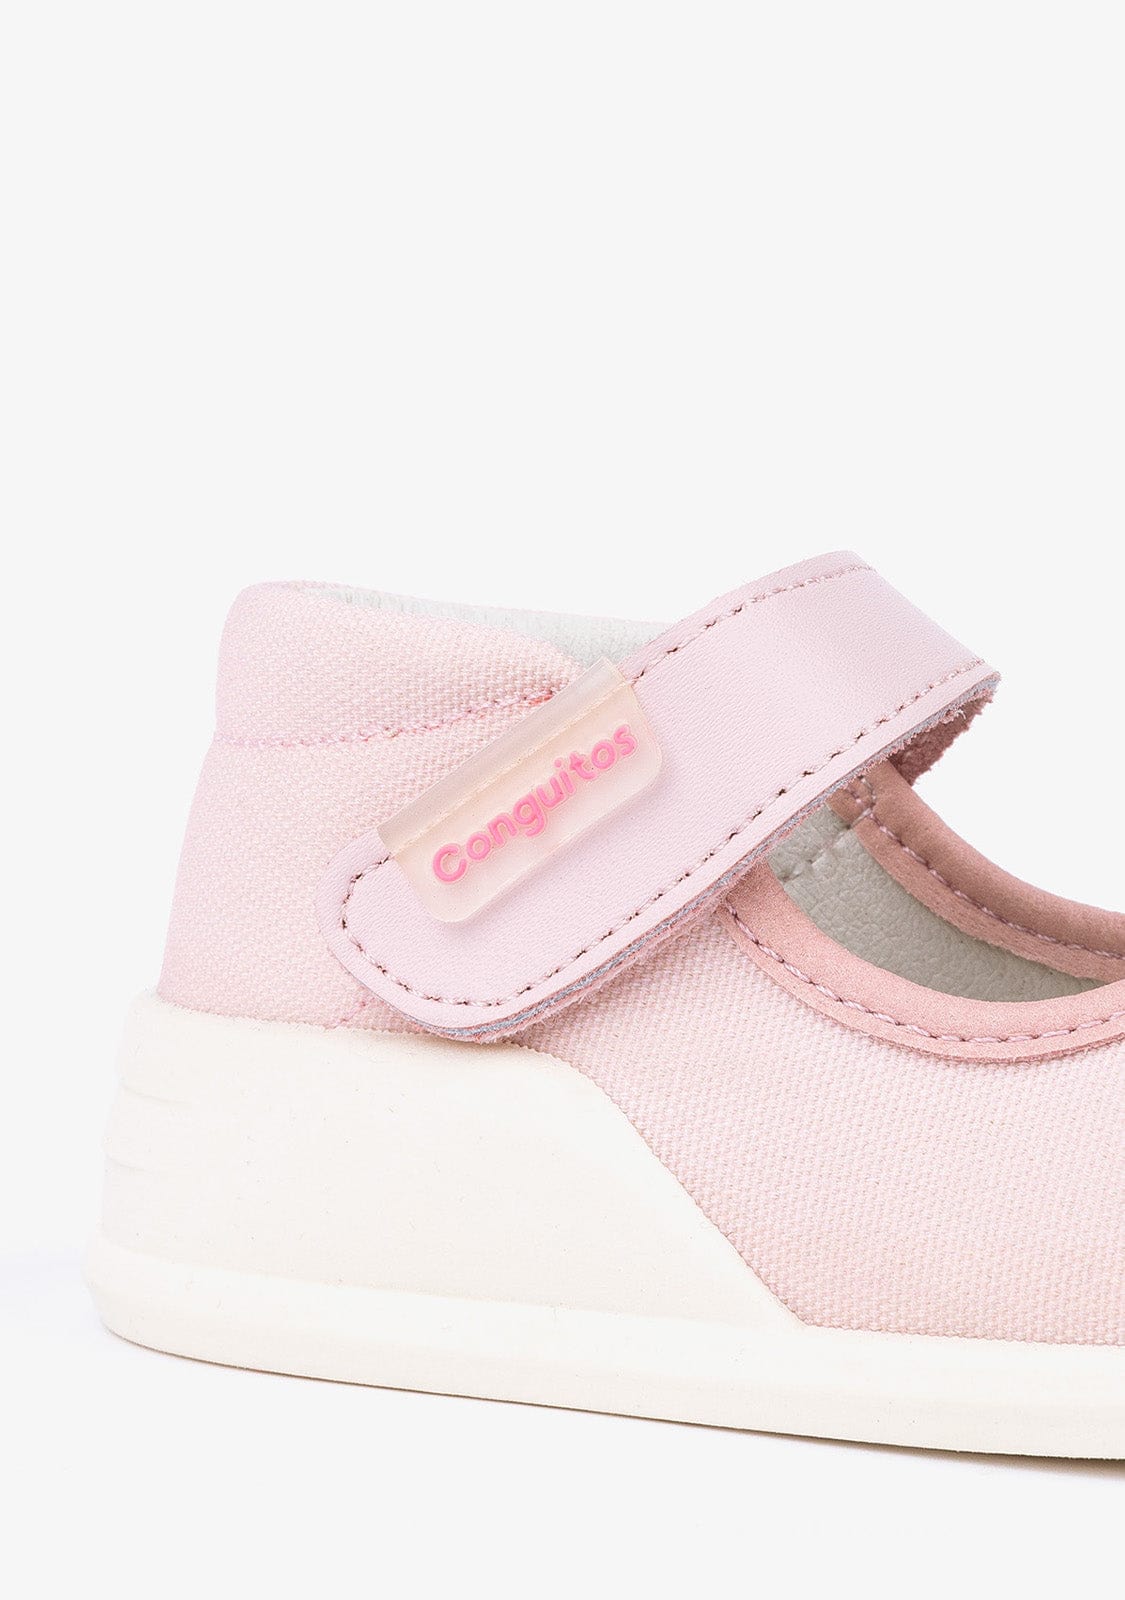 CONGUITOS Shoes Baby's Pink First Steps Mary Janes